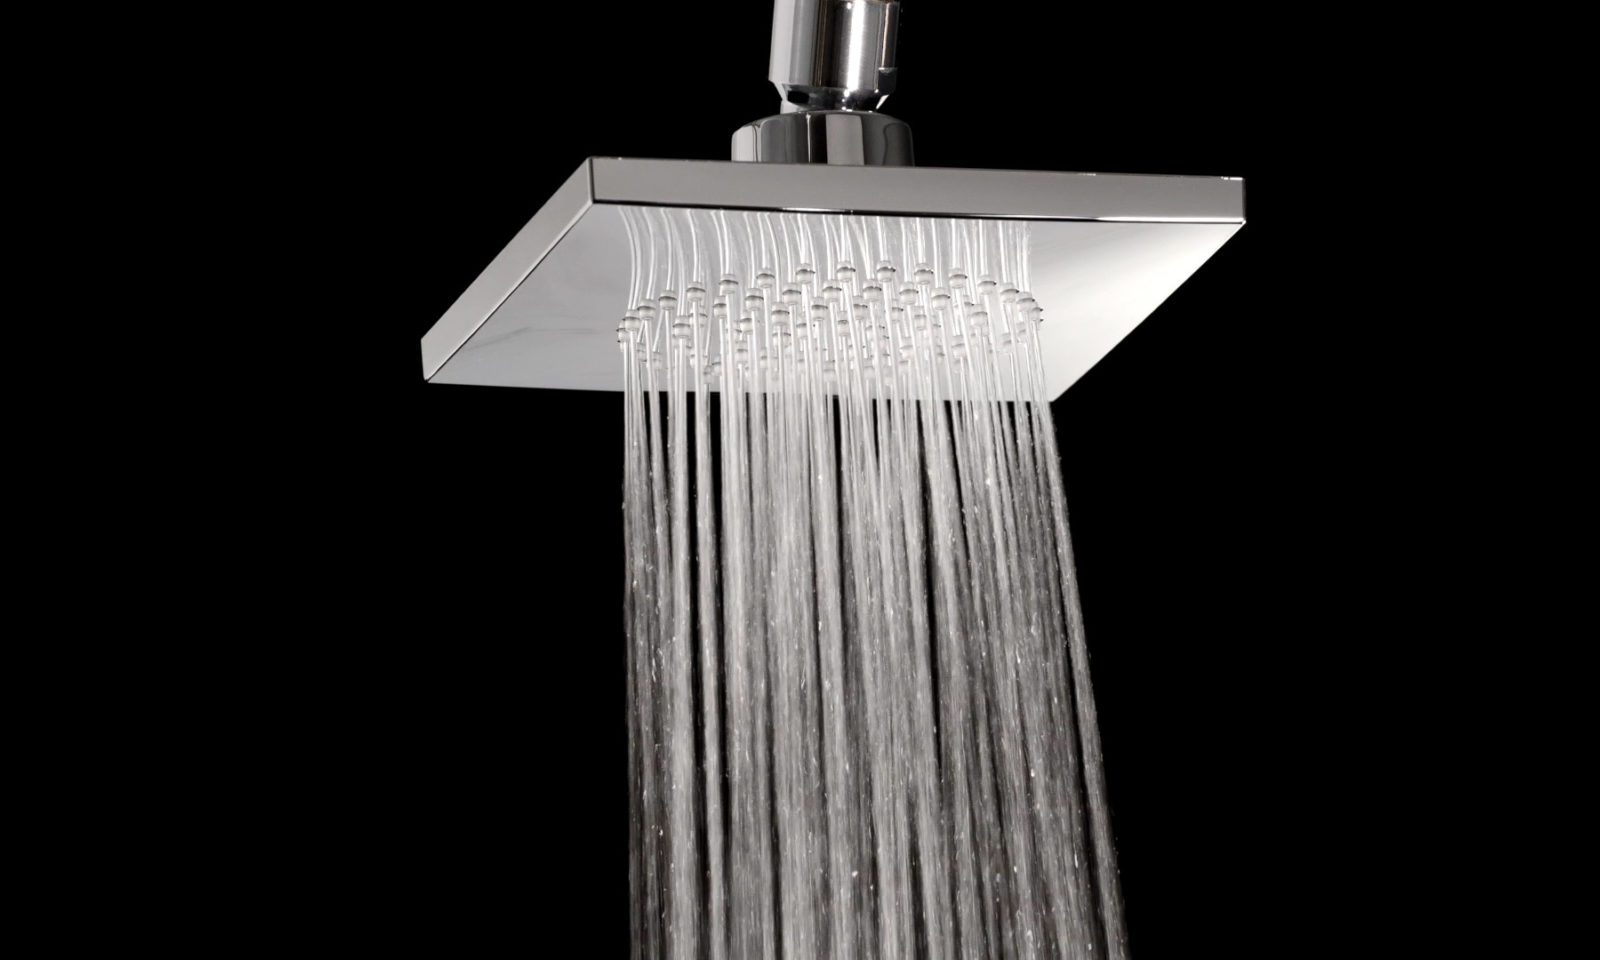 StyleFlow showerhead with running water